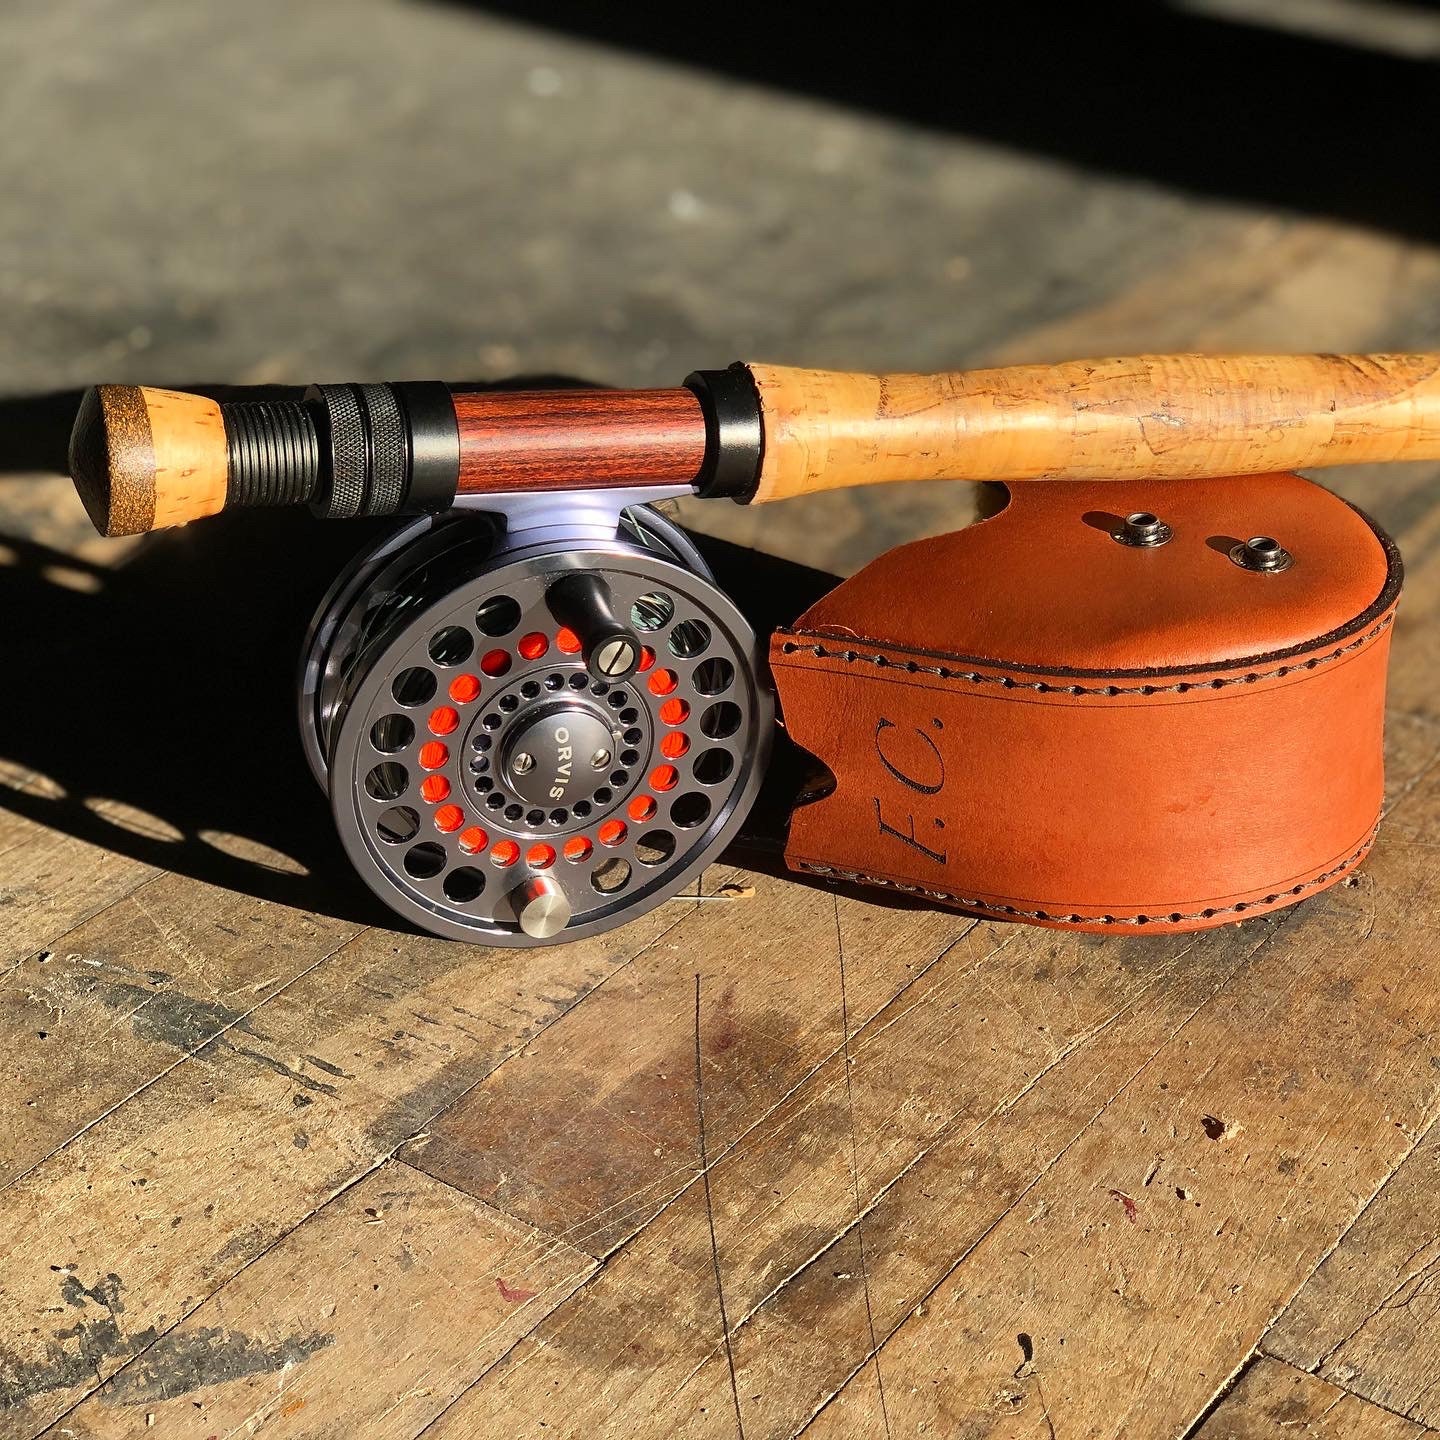 Fly Fishing Reel Case.leather Pouch. Reel Case .leather Disain  Crocodile.genuine Leather,handmade,gift,reel Box,fishing Reel,orginal,reel  